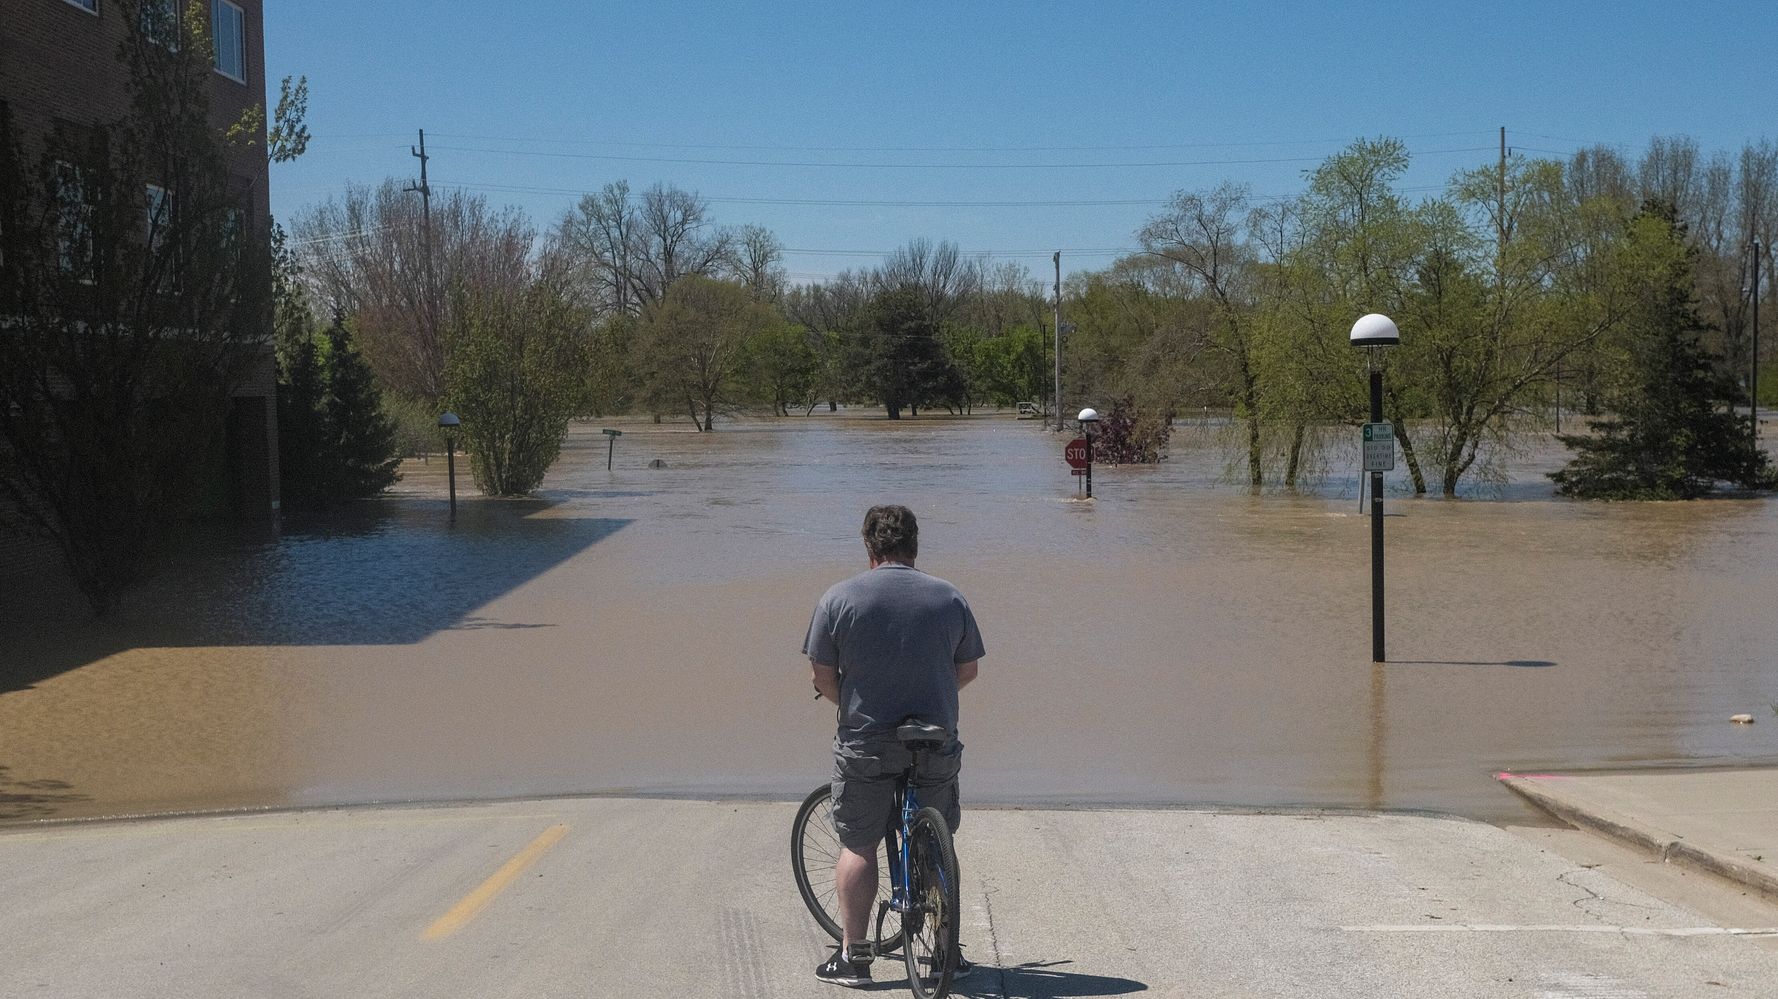 Weather Disasters Are Mounting Amid The Pandemic. Michigan Floods Are Just The Latest - HuffPost